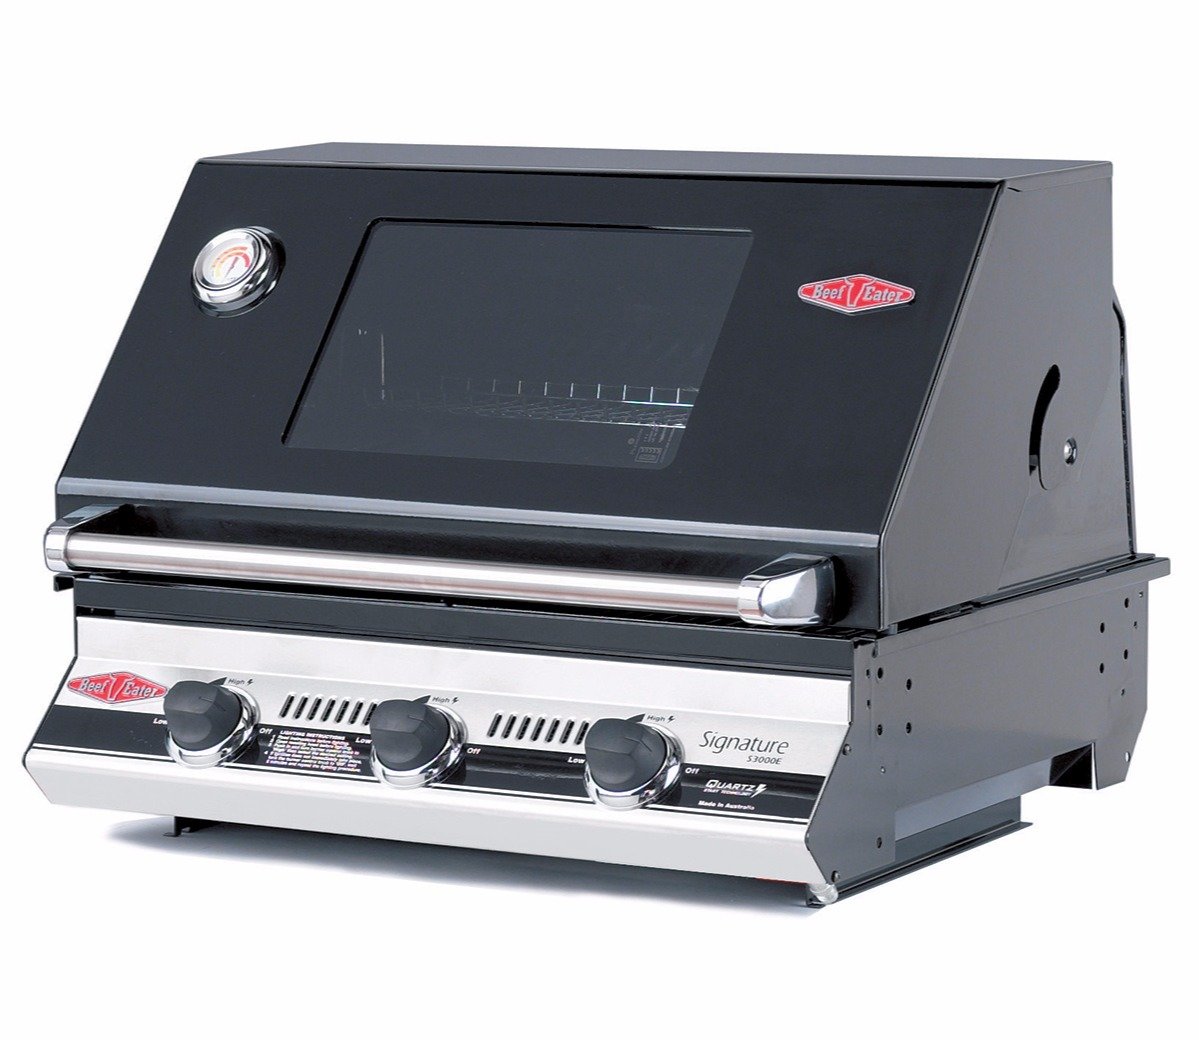 Beefeater S3000e Built-in 3 Burner Gas Bbq